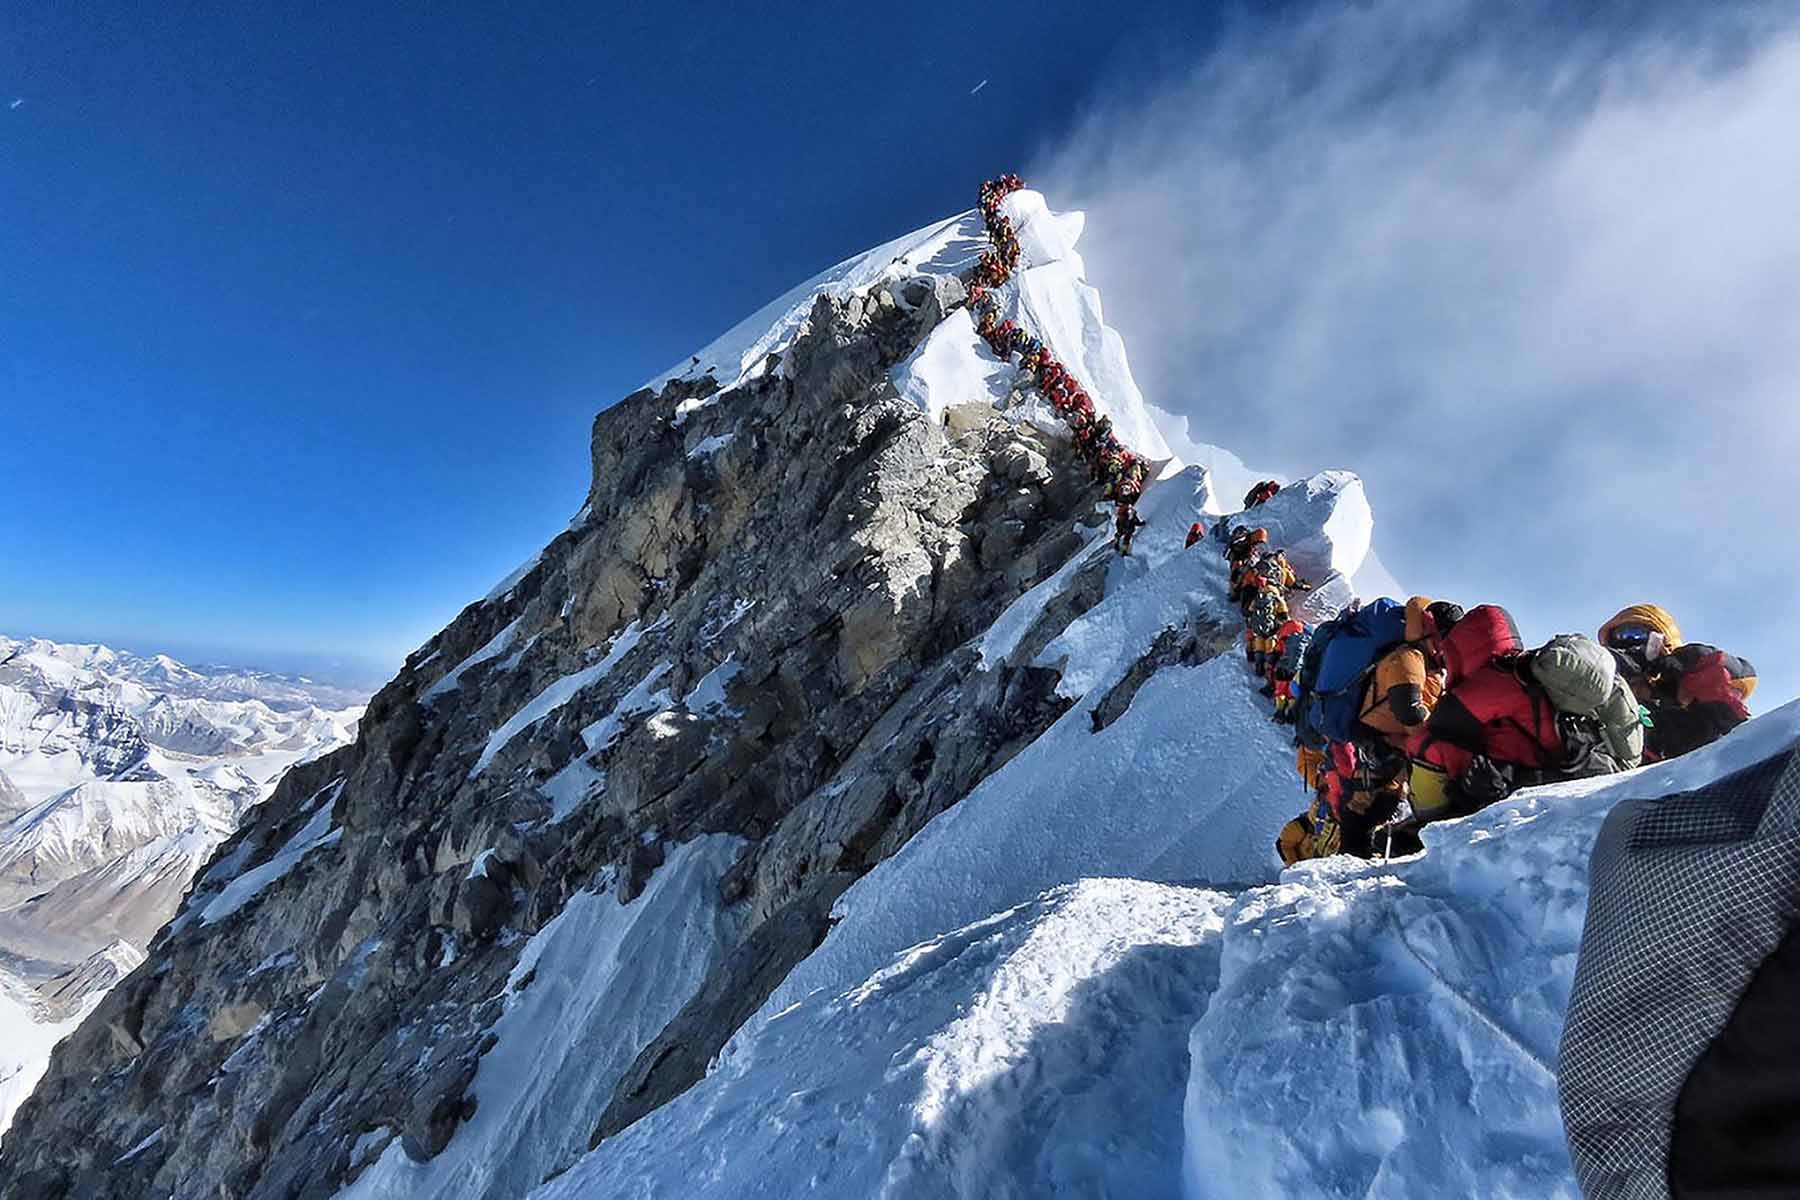 Hikers with brightly coloured coats and packs scale the snowy peak of Mount Everest in single file.